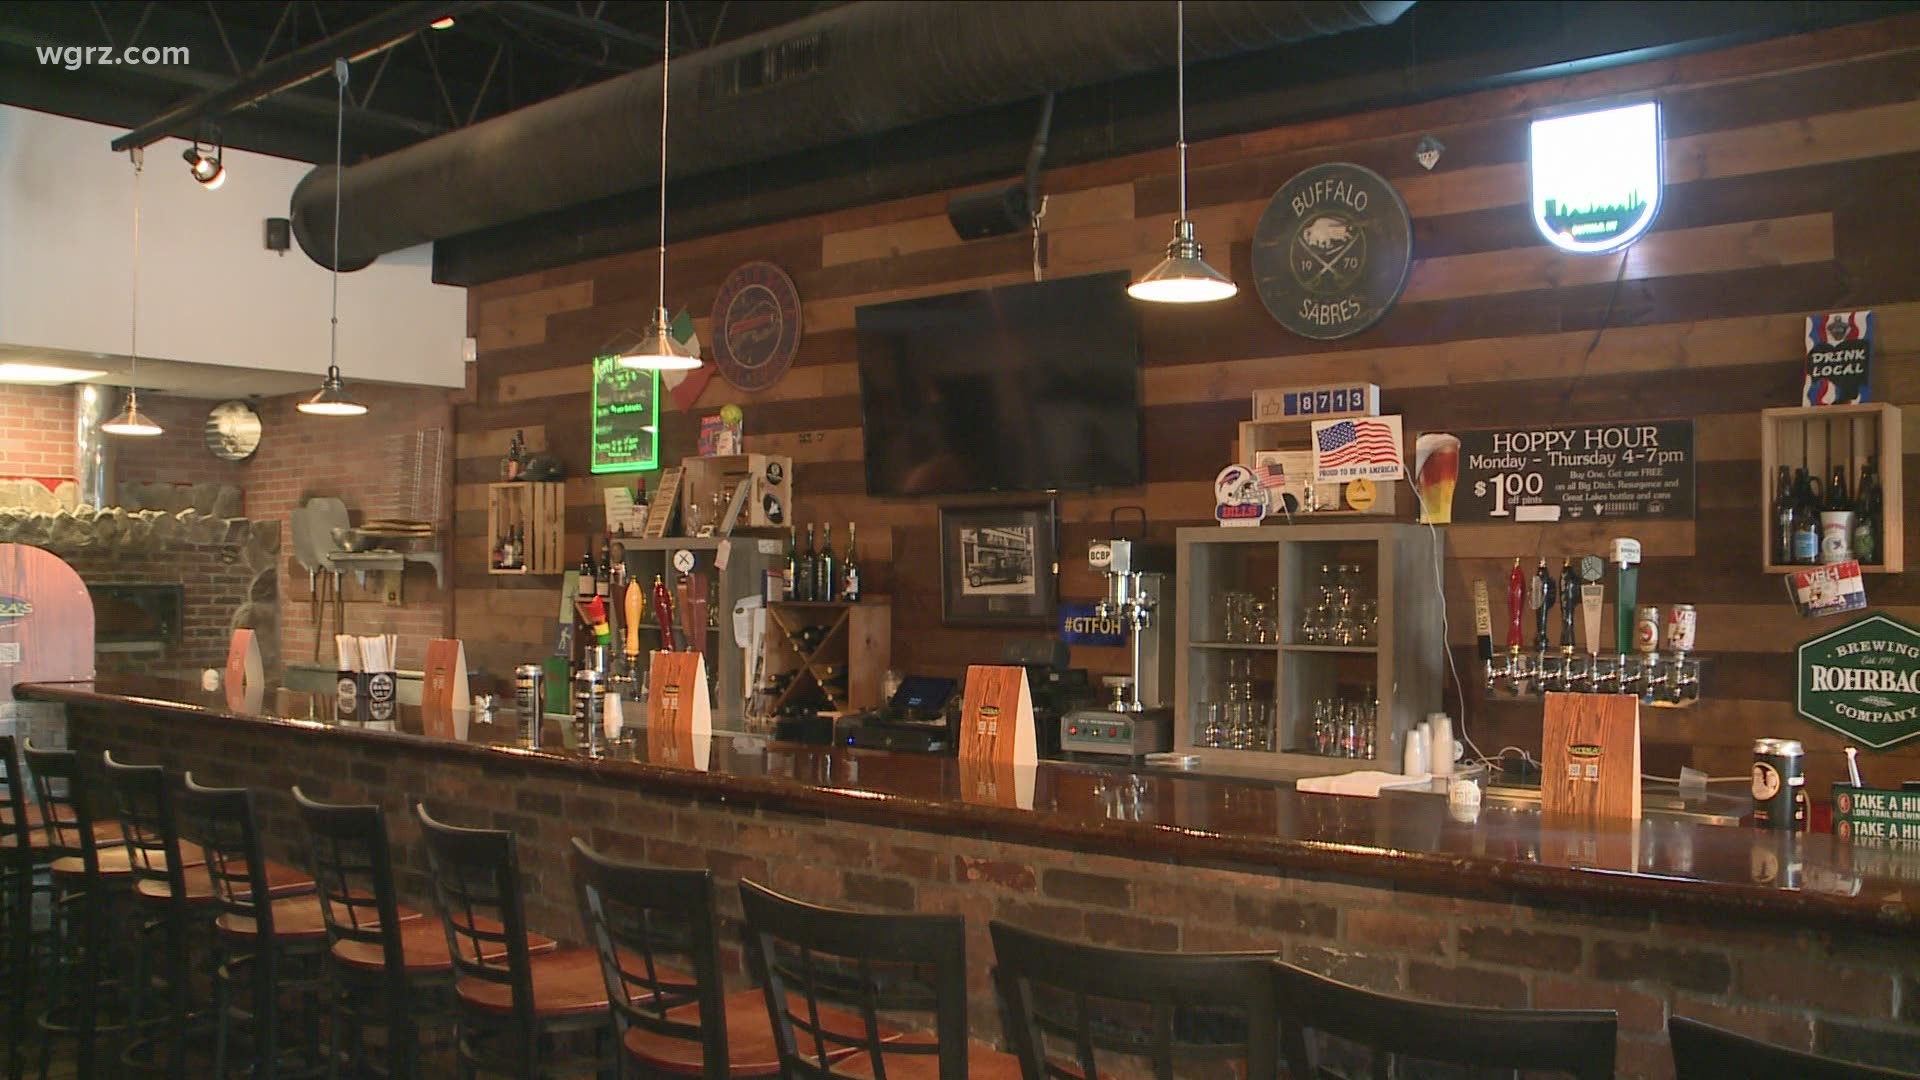 A Hamburg restaurant owner says he's having big problems finding employees and the only people applying are teenagers with no experience.